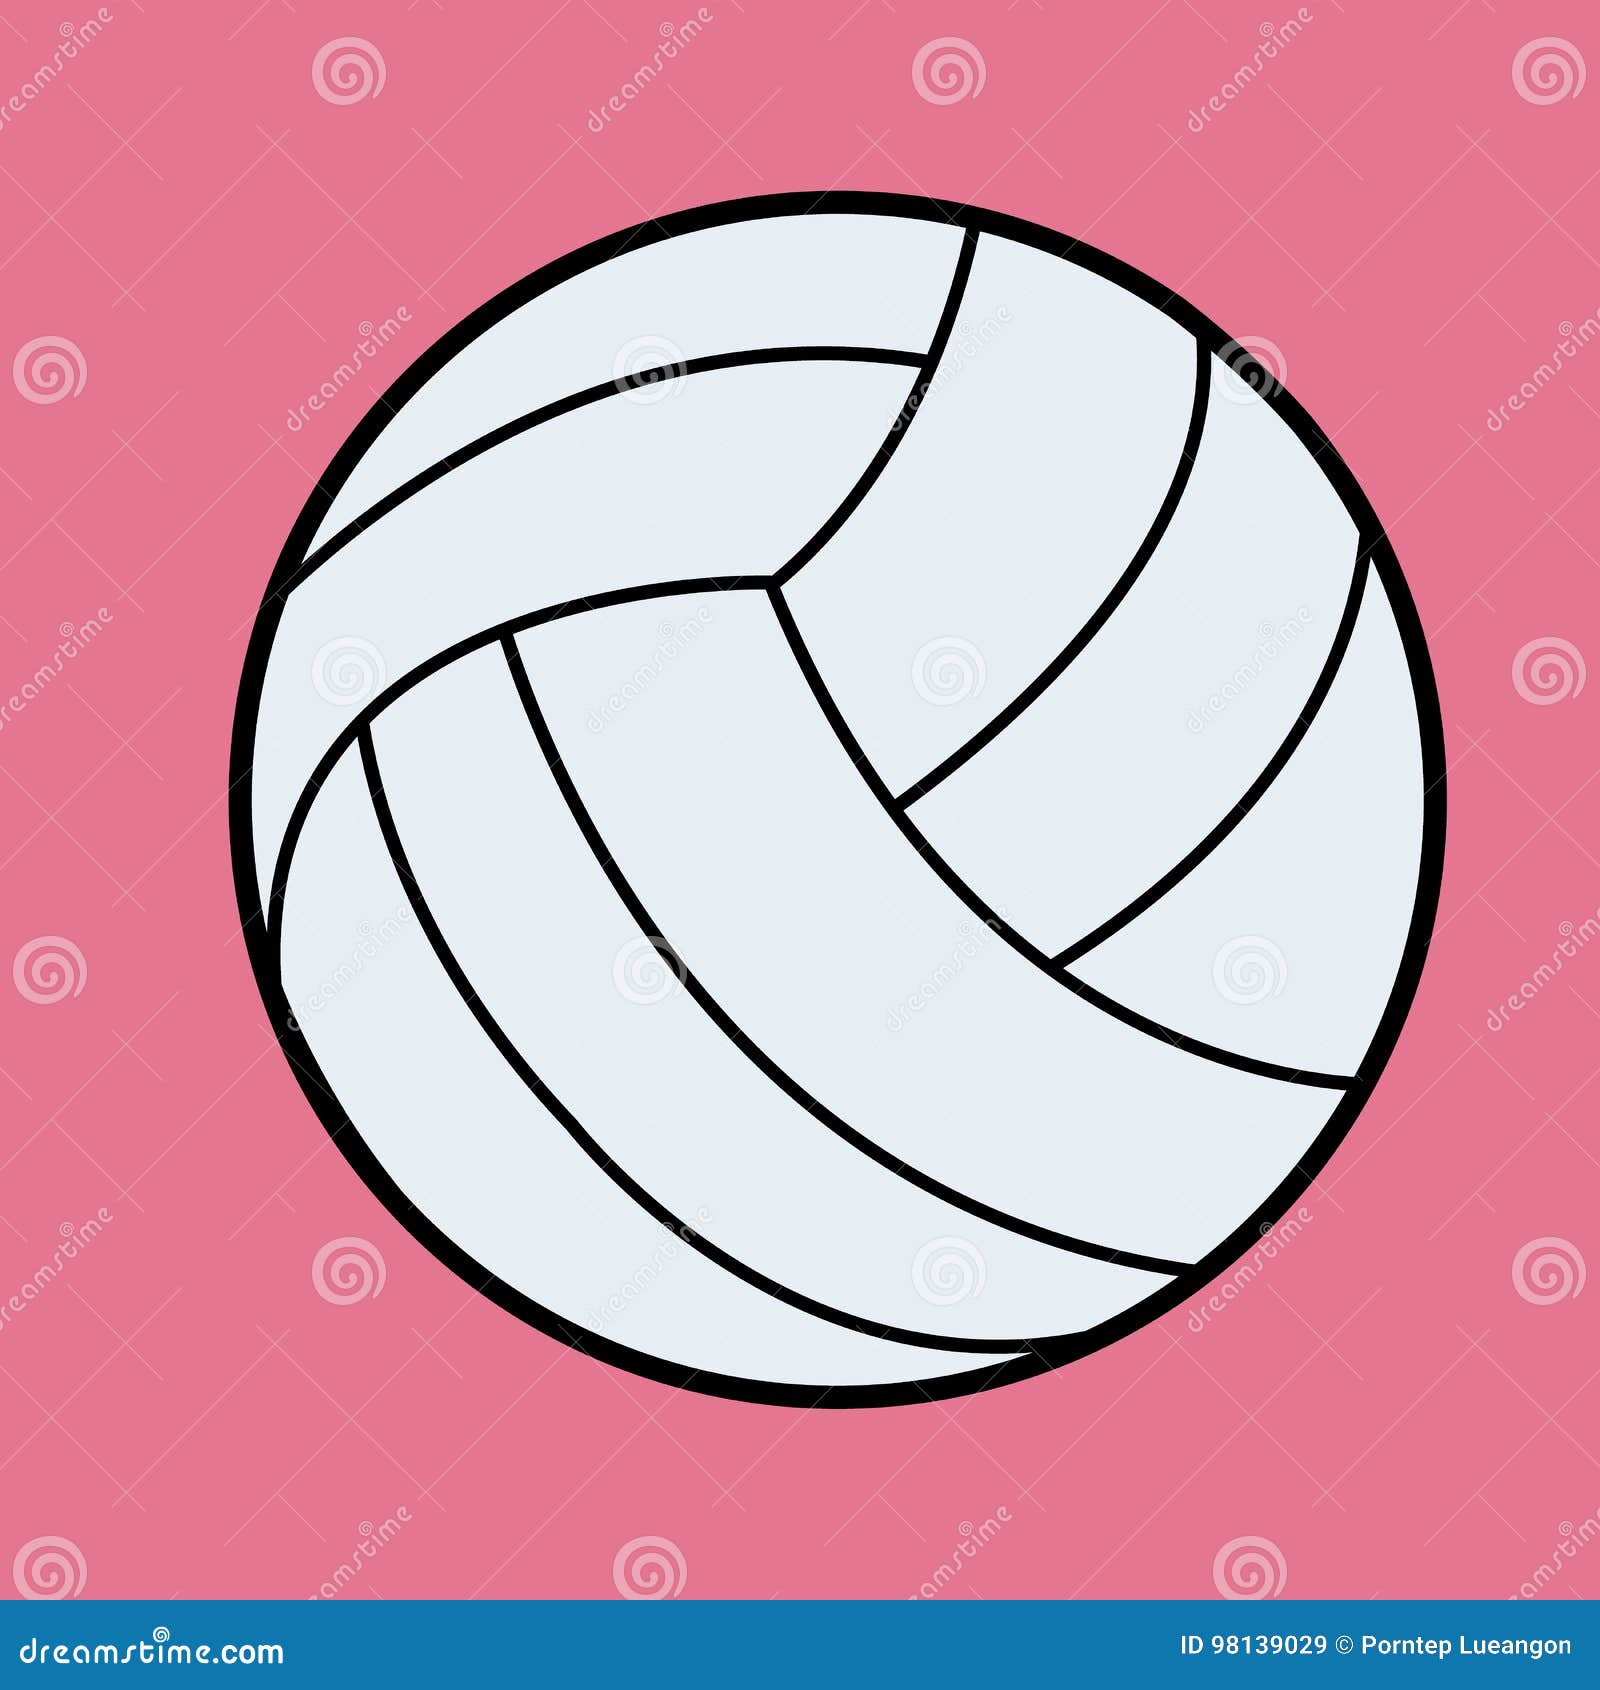 White Volleyball Vector.Volleyball Icon on Pink Stock Vector ...